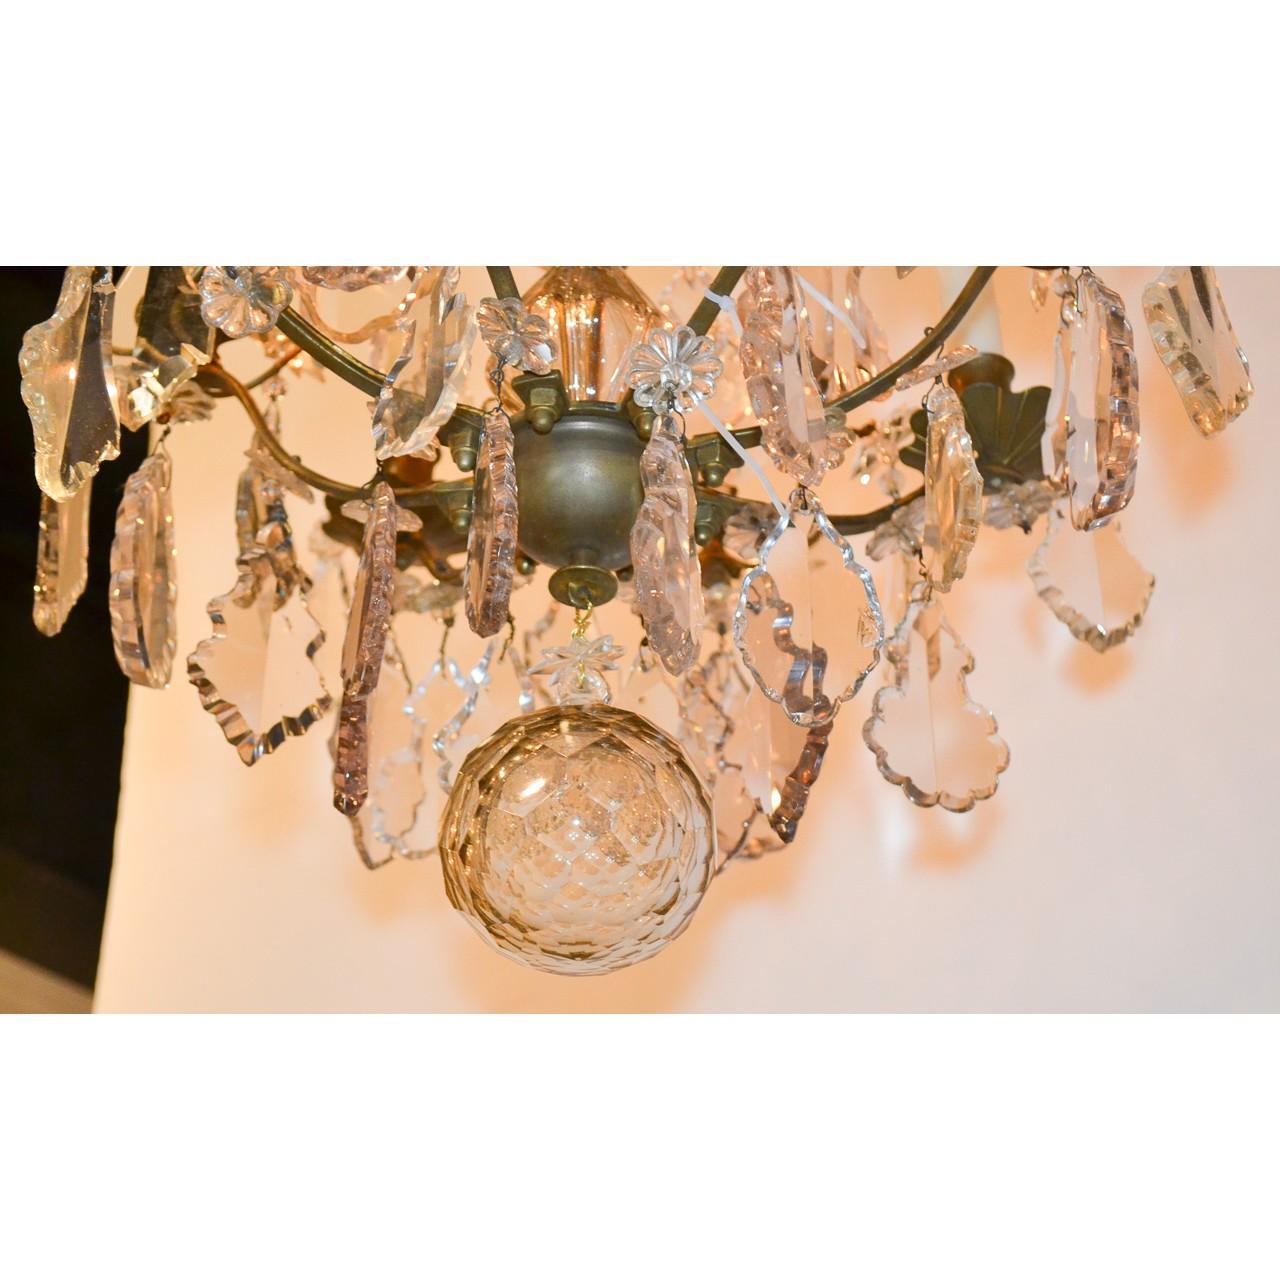 Beautiful 19th century French bronze and cut crystal chandelier. The crown decorated with rosettes and star flowers above a shaped stem with four scrolling arms with scalloped bobeche. Richly adorned overall with pendeloque and kite-shaped crystal